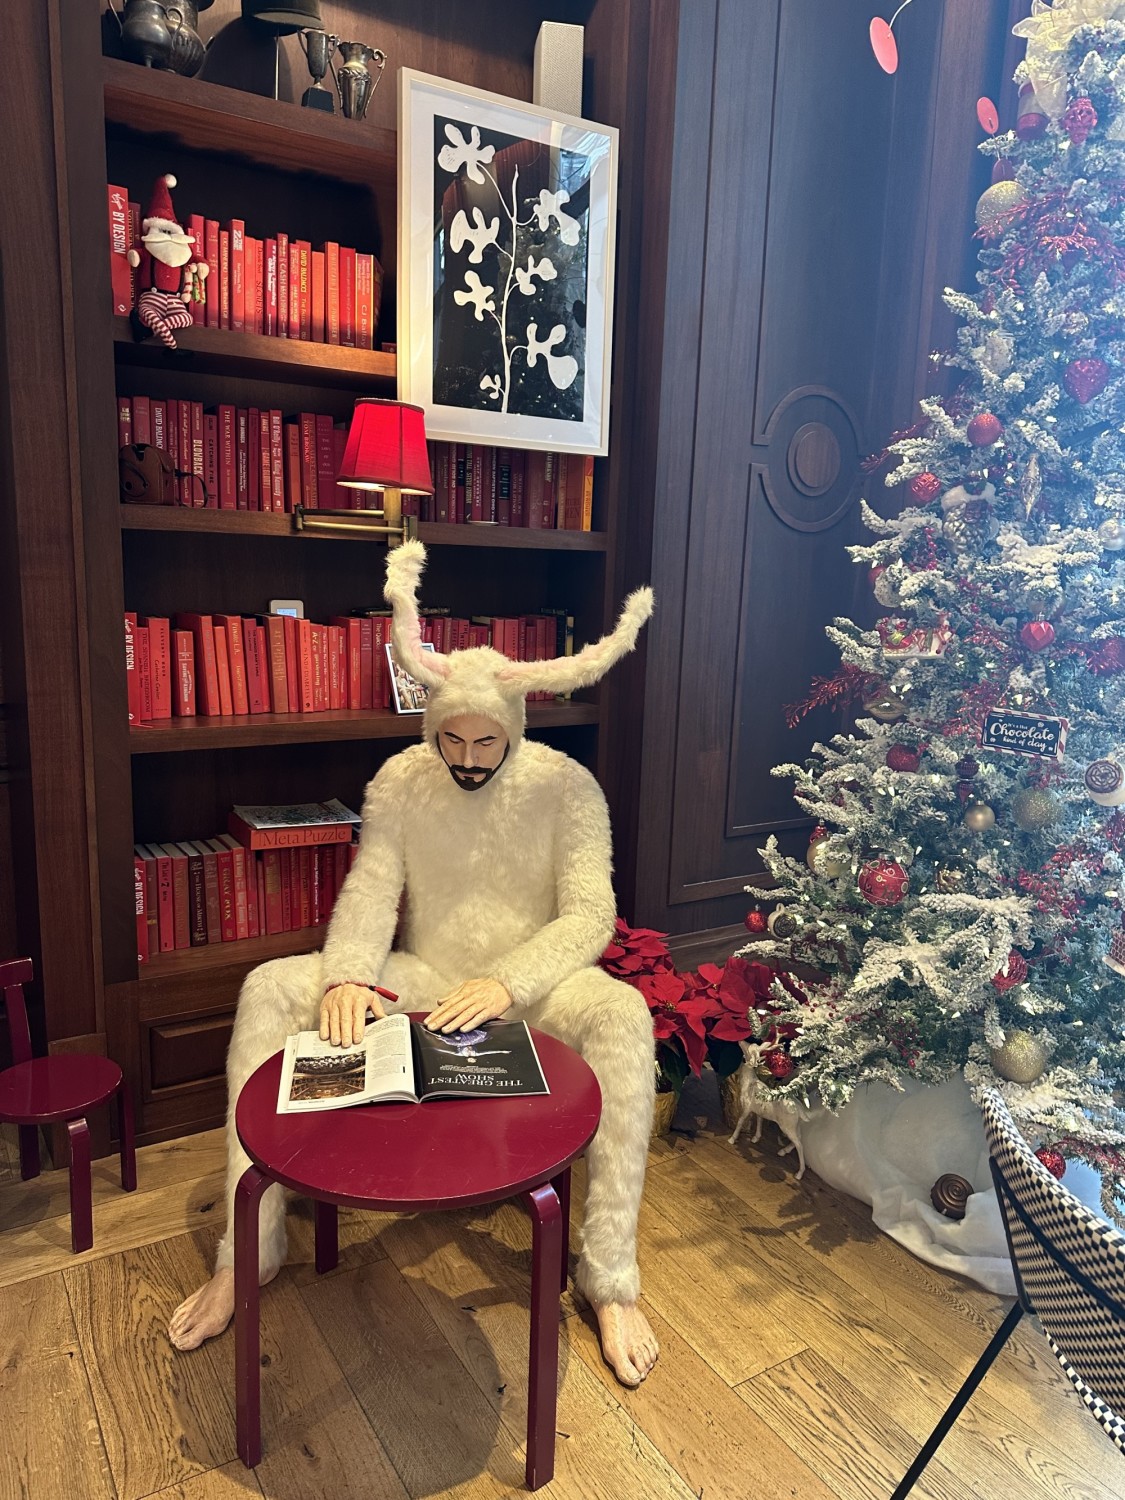 Unique artwork at the hotel of a man dressed in a furry bunny outfit sitting at a small red table reading. There is a bookshelf of red books behind and a christmas tree in view.